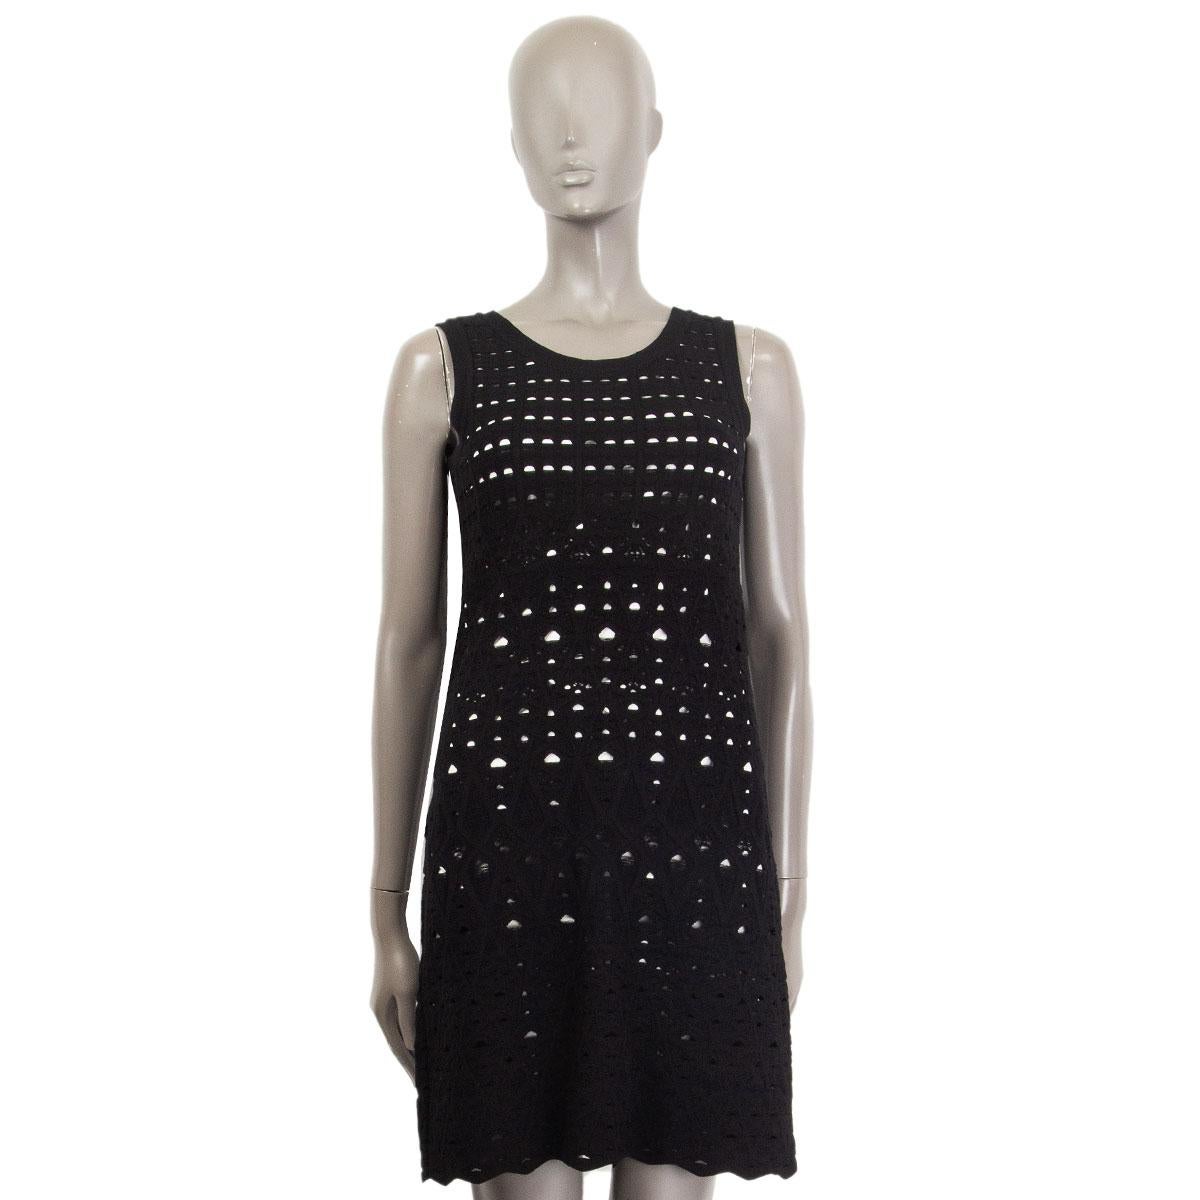 100% authentic Chanel flared crochet dress in black and white viscose (67%) polyester (33%) with a round neckline. Sleeveless, elastic fabric and a small black CC-logo at the top of the back. Lined in white viscose (67%) polyester (33%). Slip-on